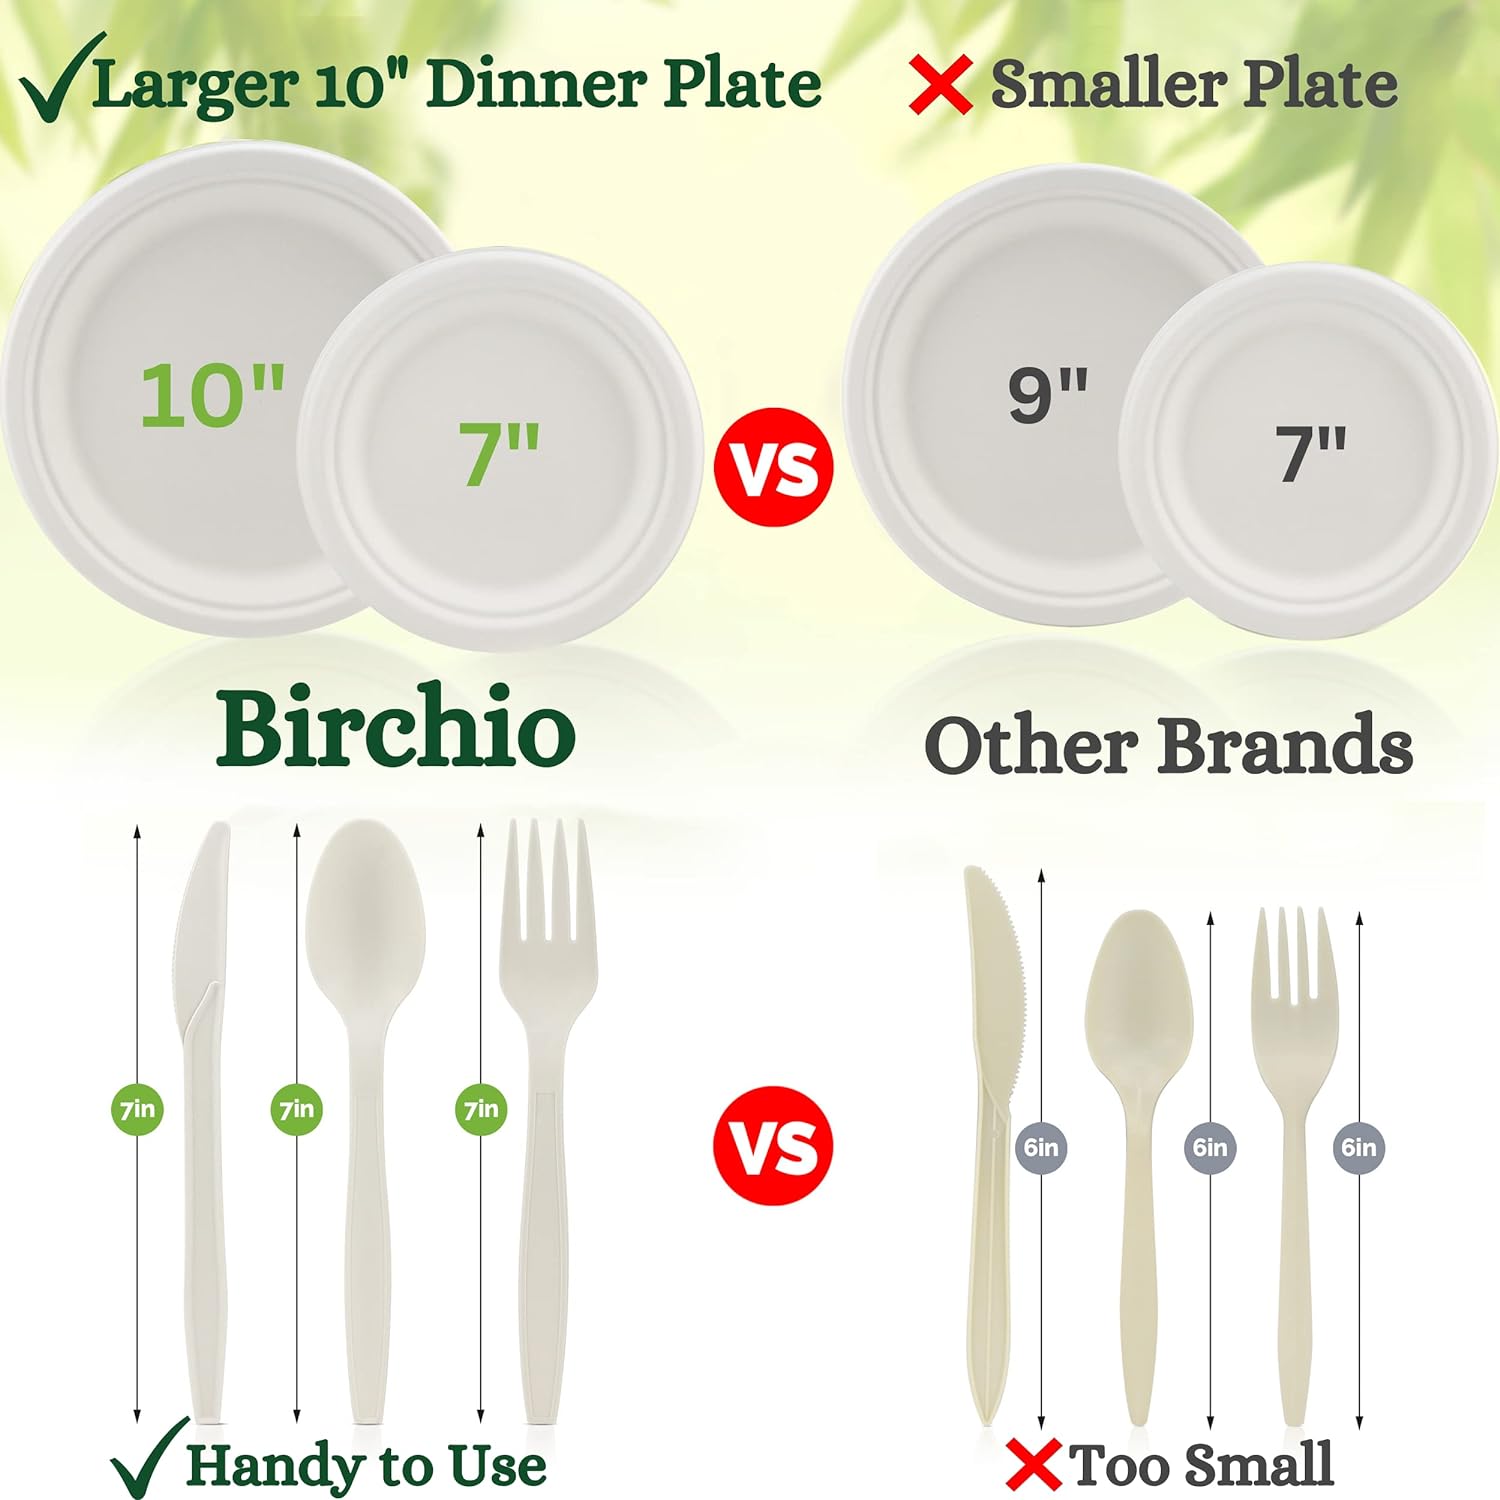 Large Paper Plates - Set of 10